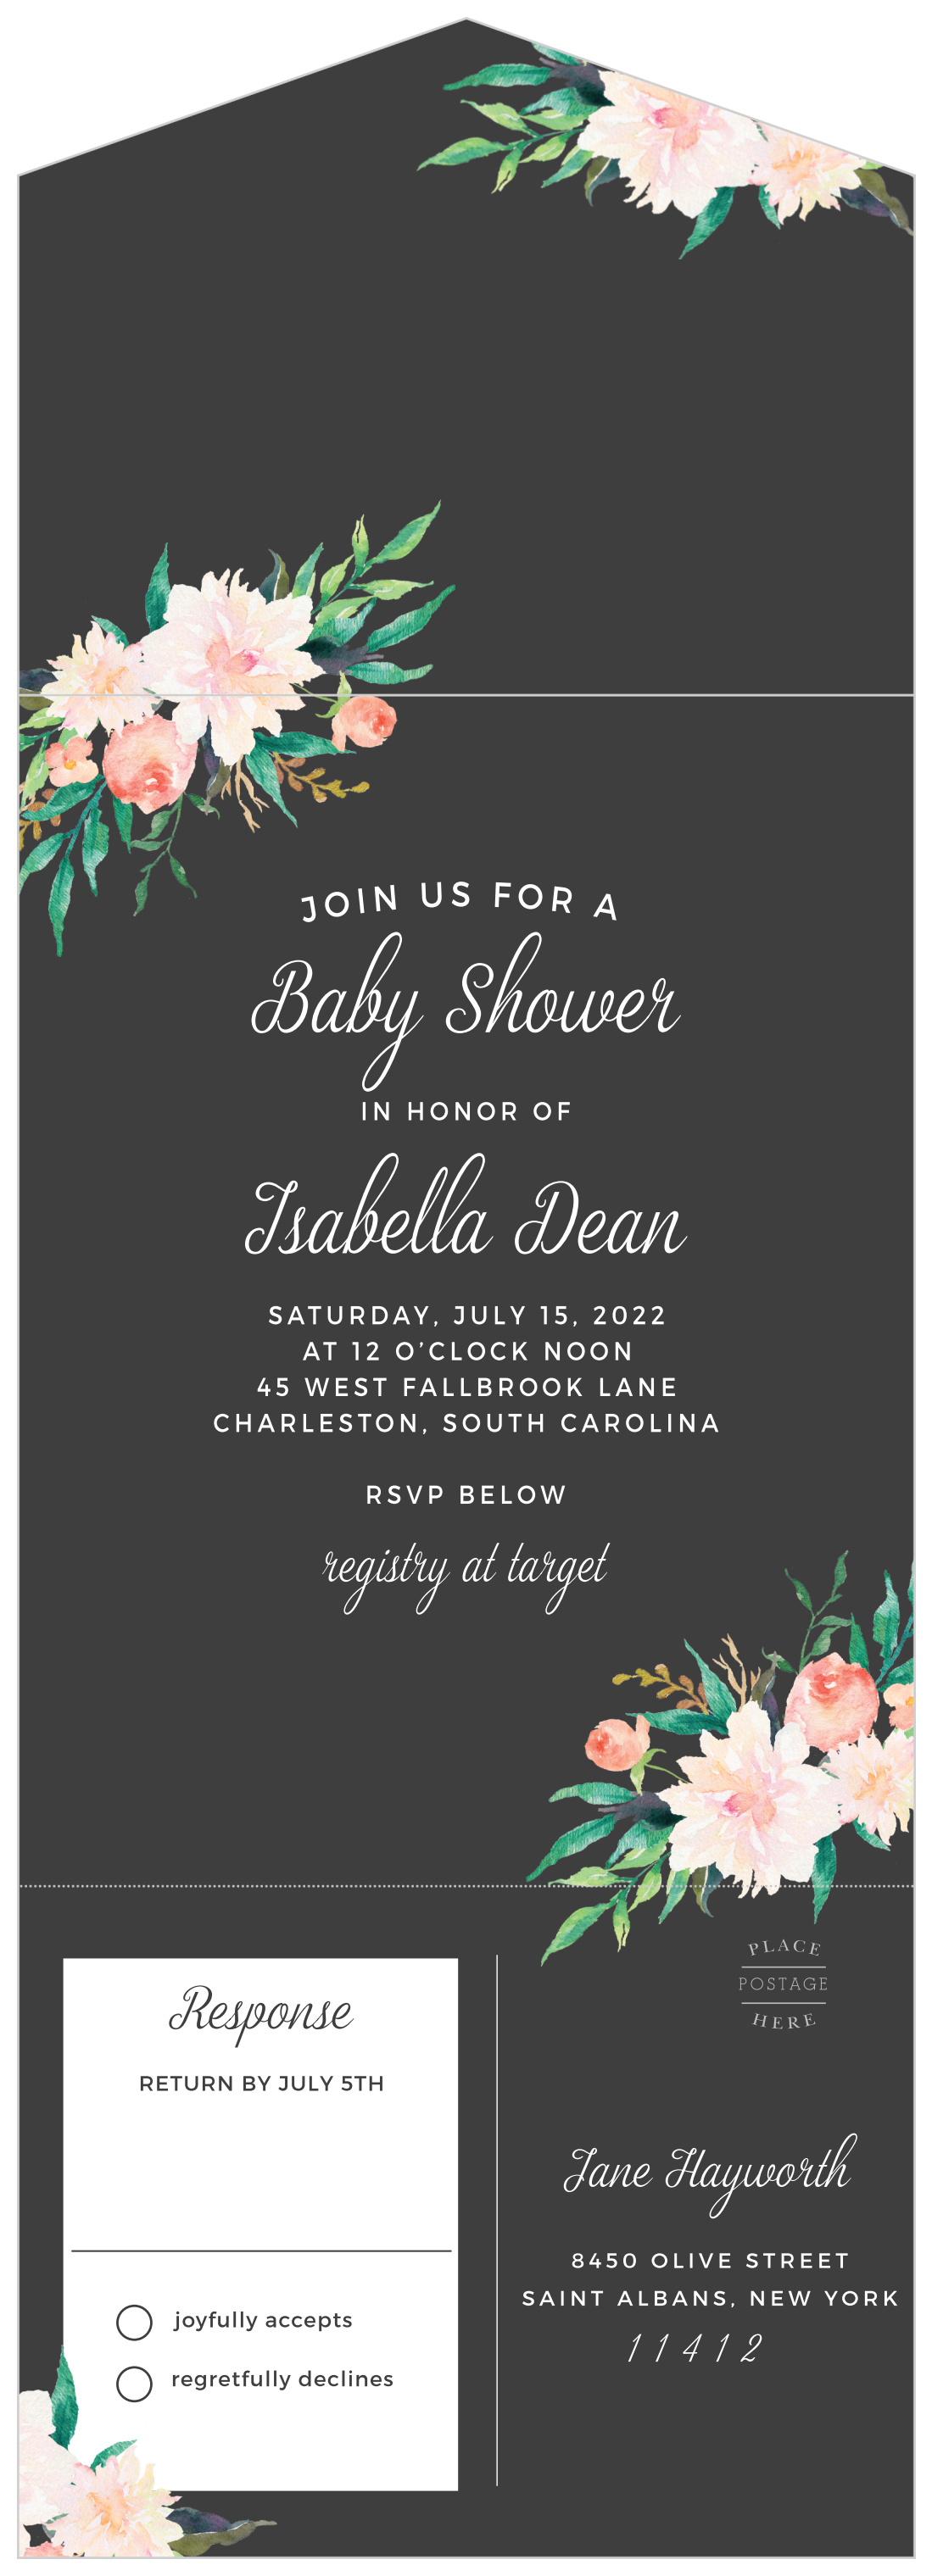 Lovely Blossoms Seal & Send Baby Shower Invitations